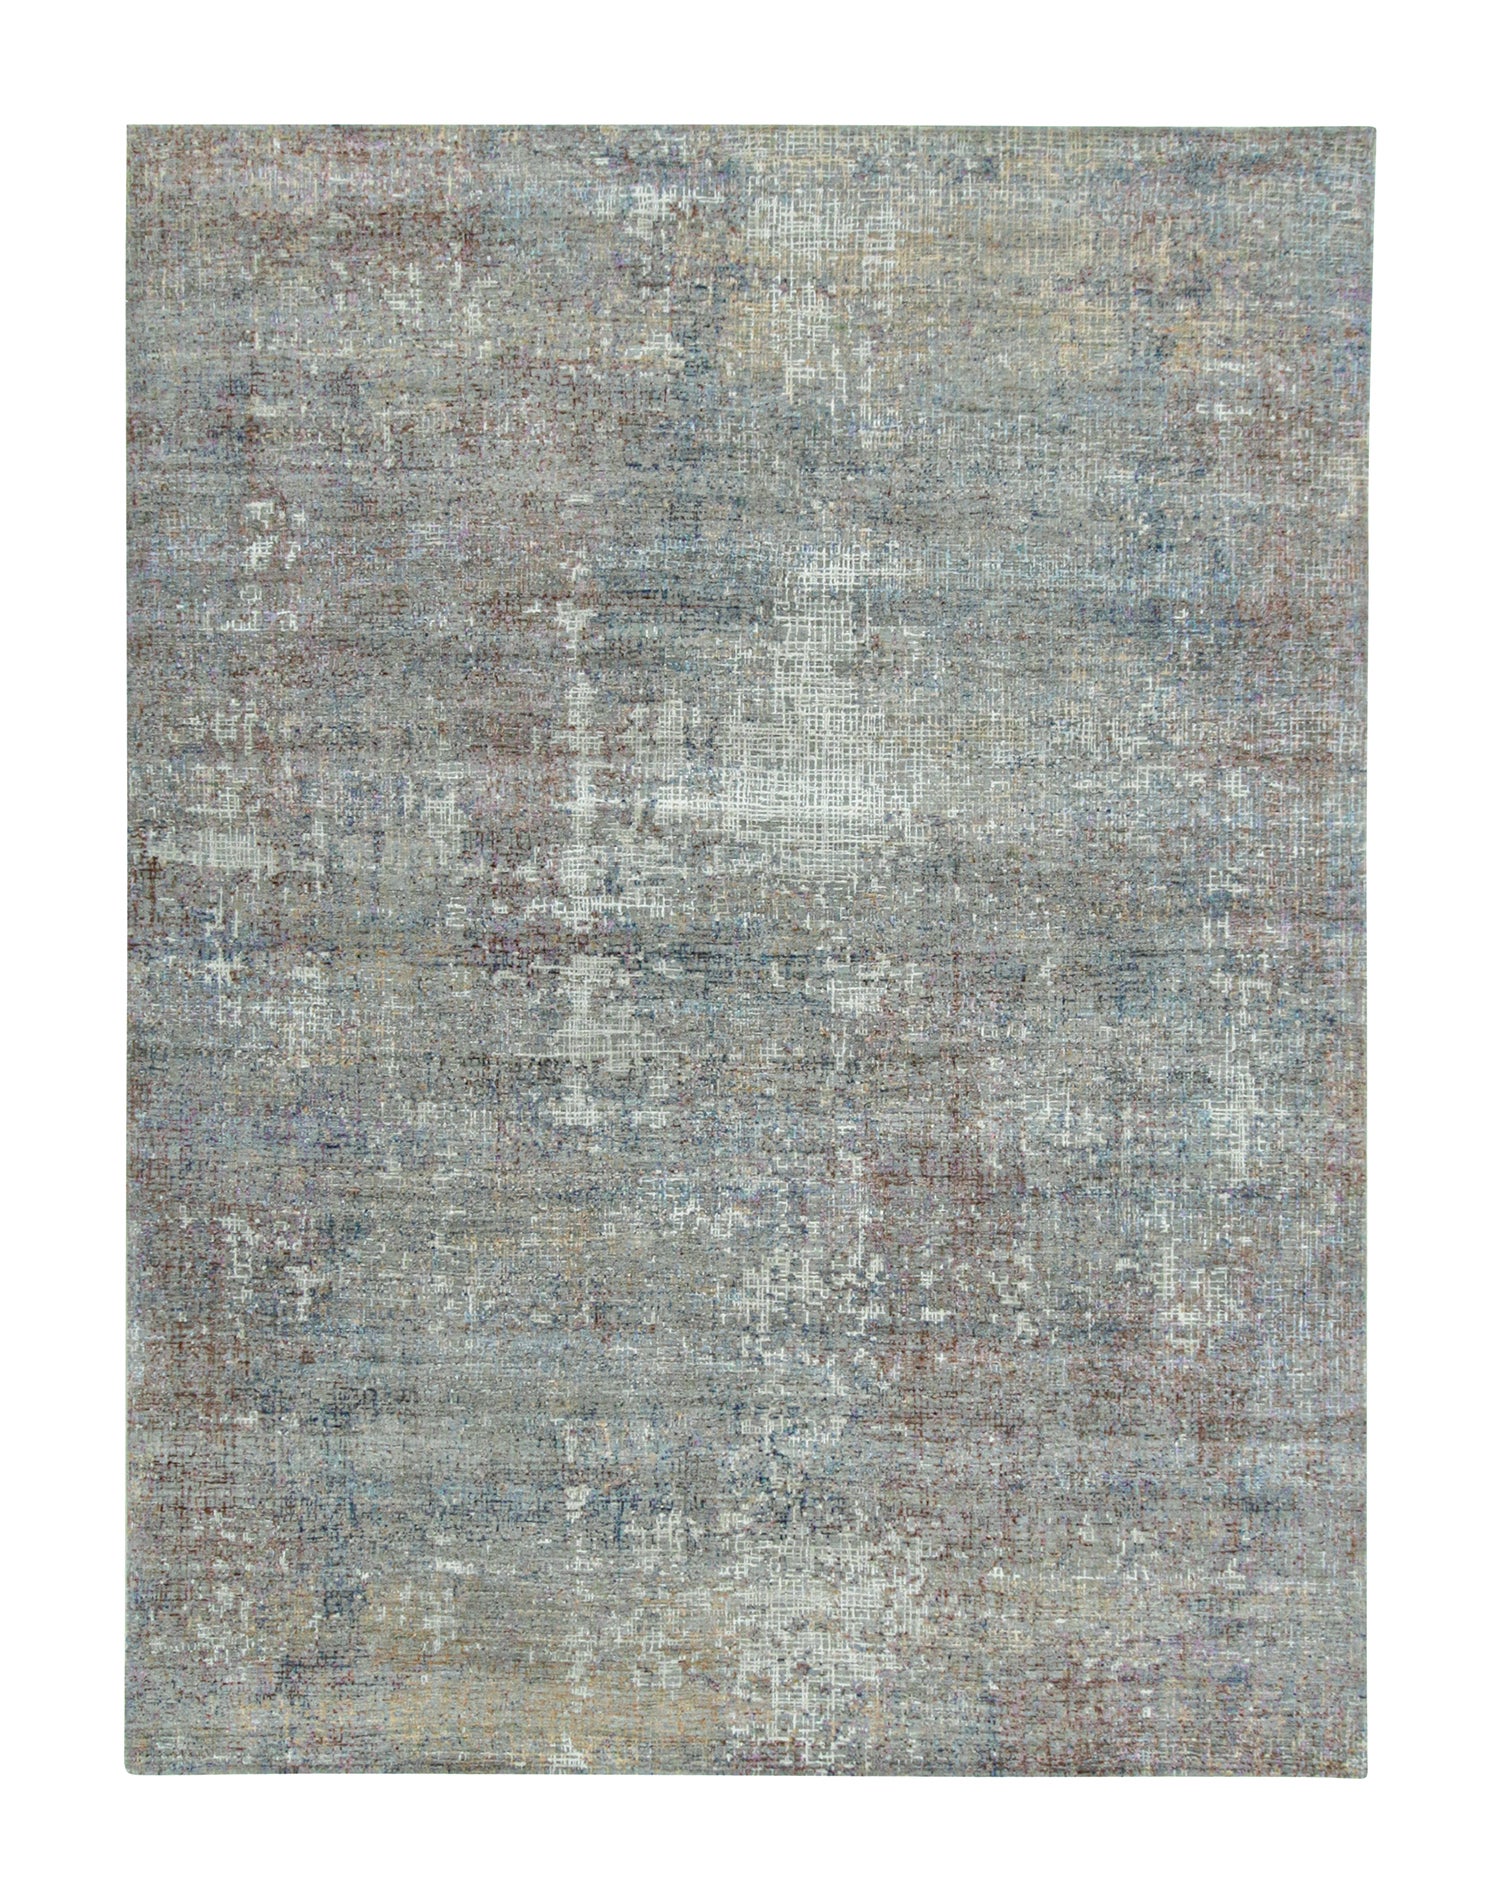 Rug & Kilim’s Abstract Rug in Gray with Colorful Geometric Streaks